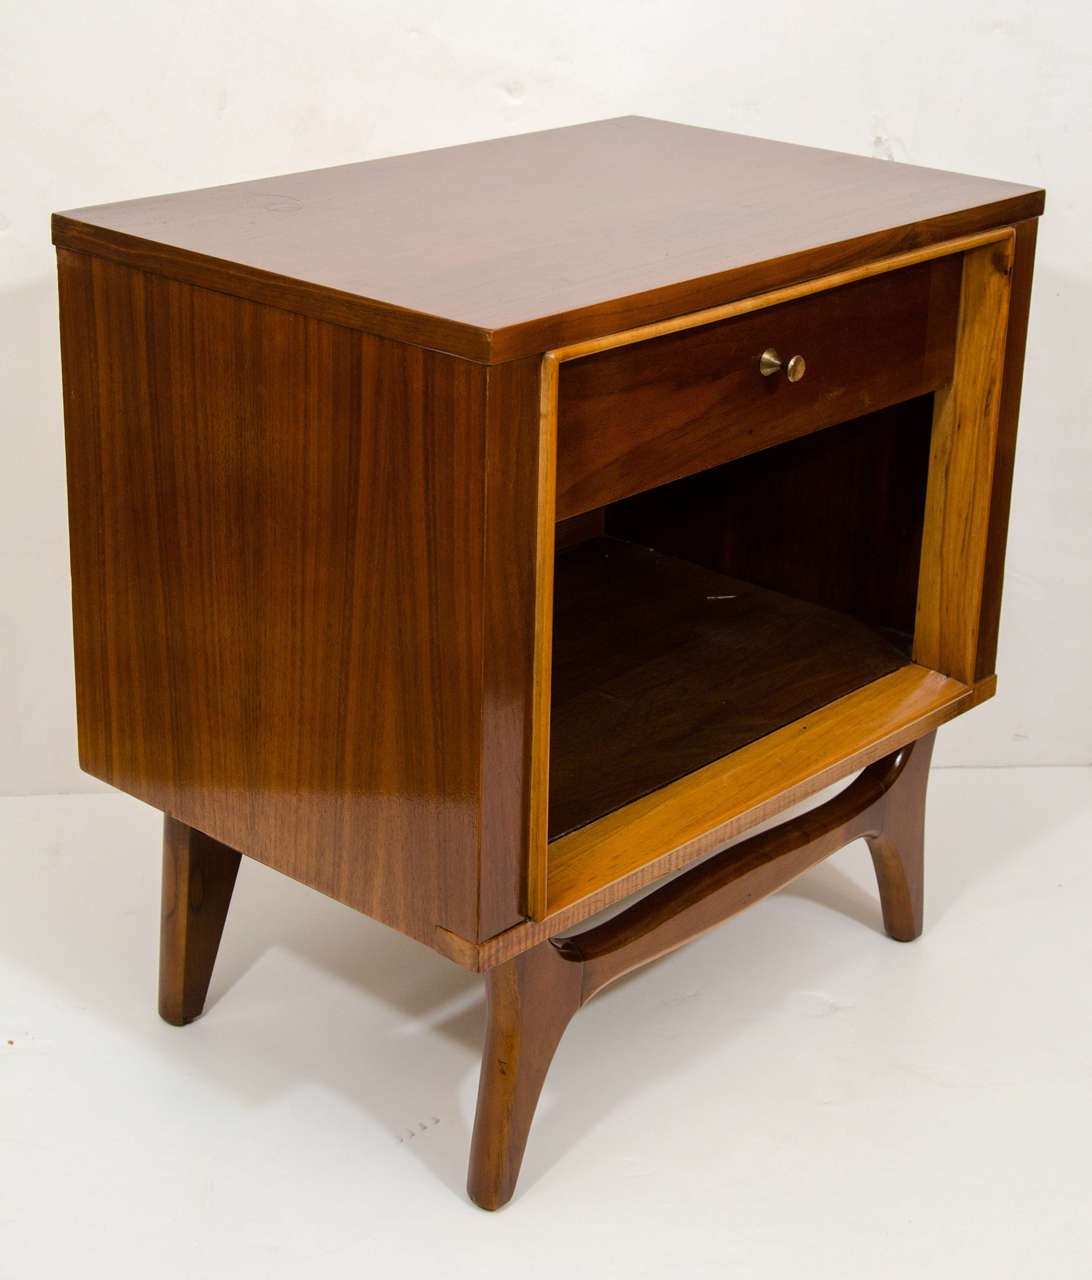 A pretty cube, crafted of walnut and birch and resting on a curved walnut frame. The cabinet has a single drawer, and large open compartment for books or periodicals. Perfect companion to any couch or bed; made to rest a beverage or book.